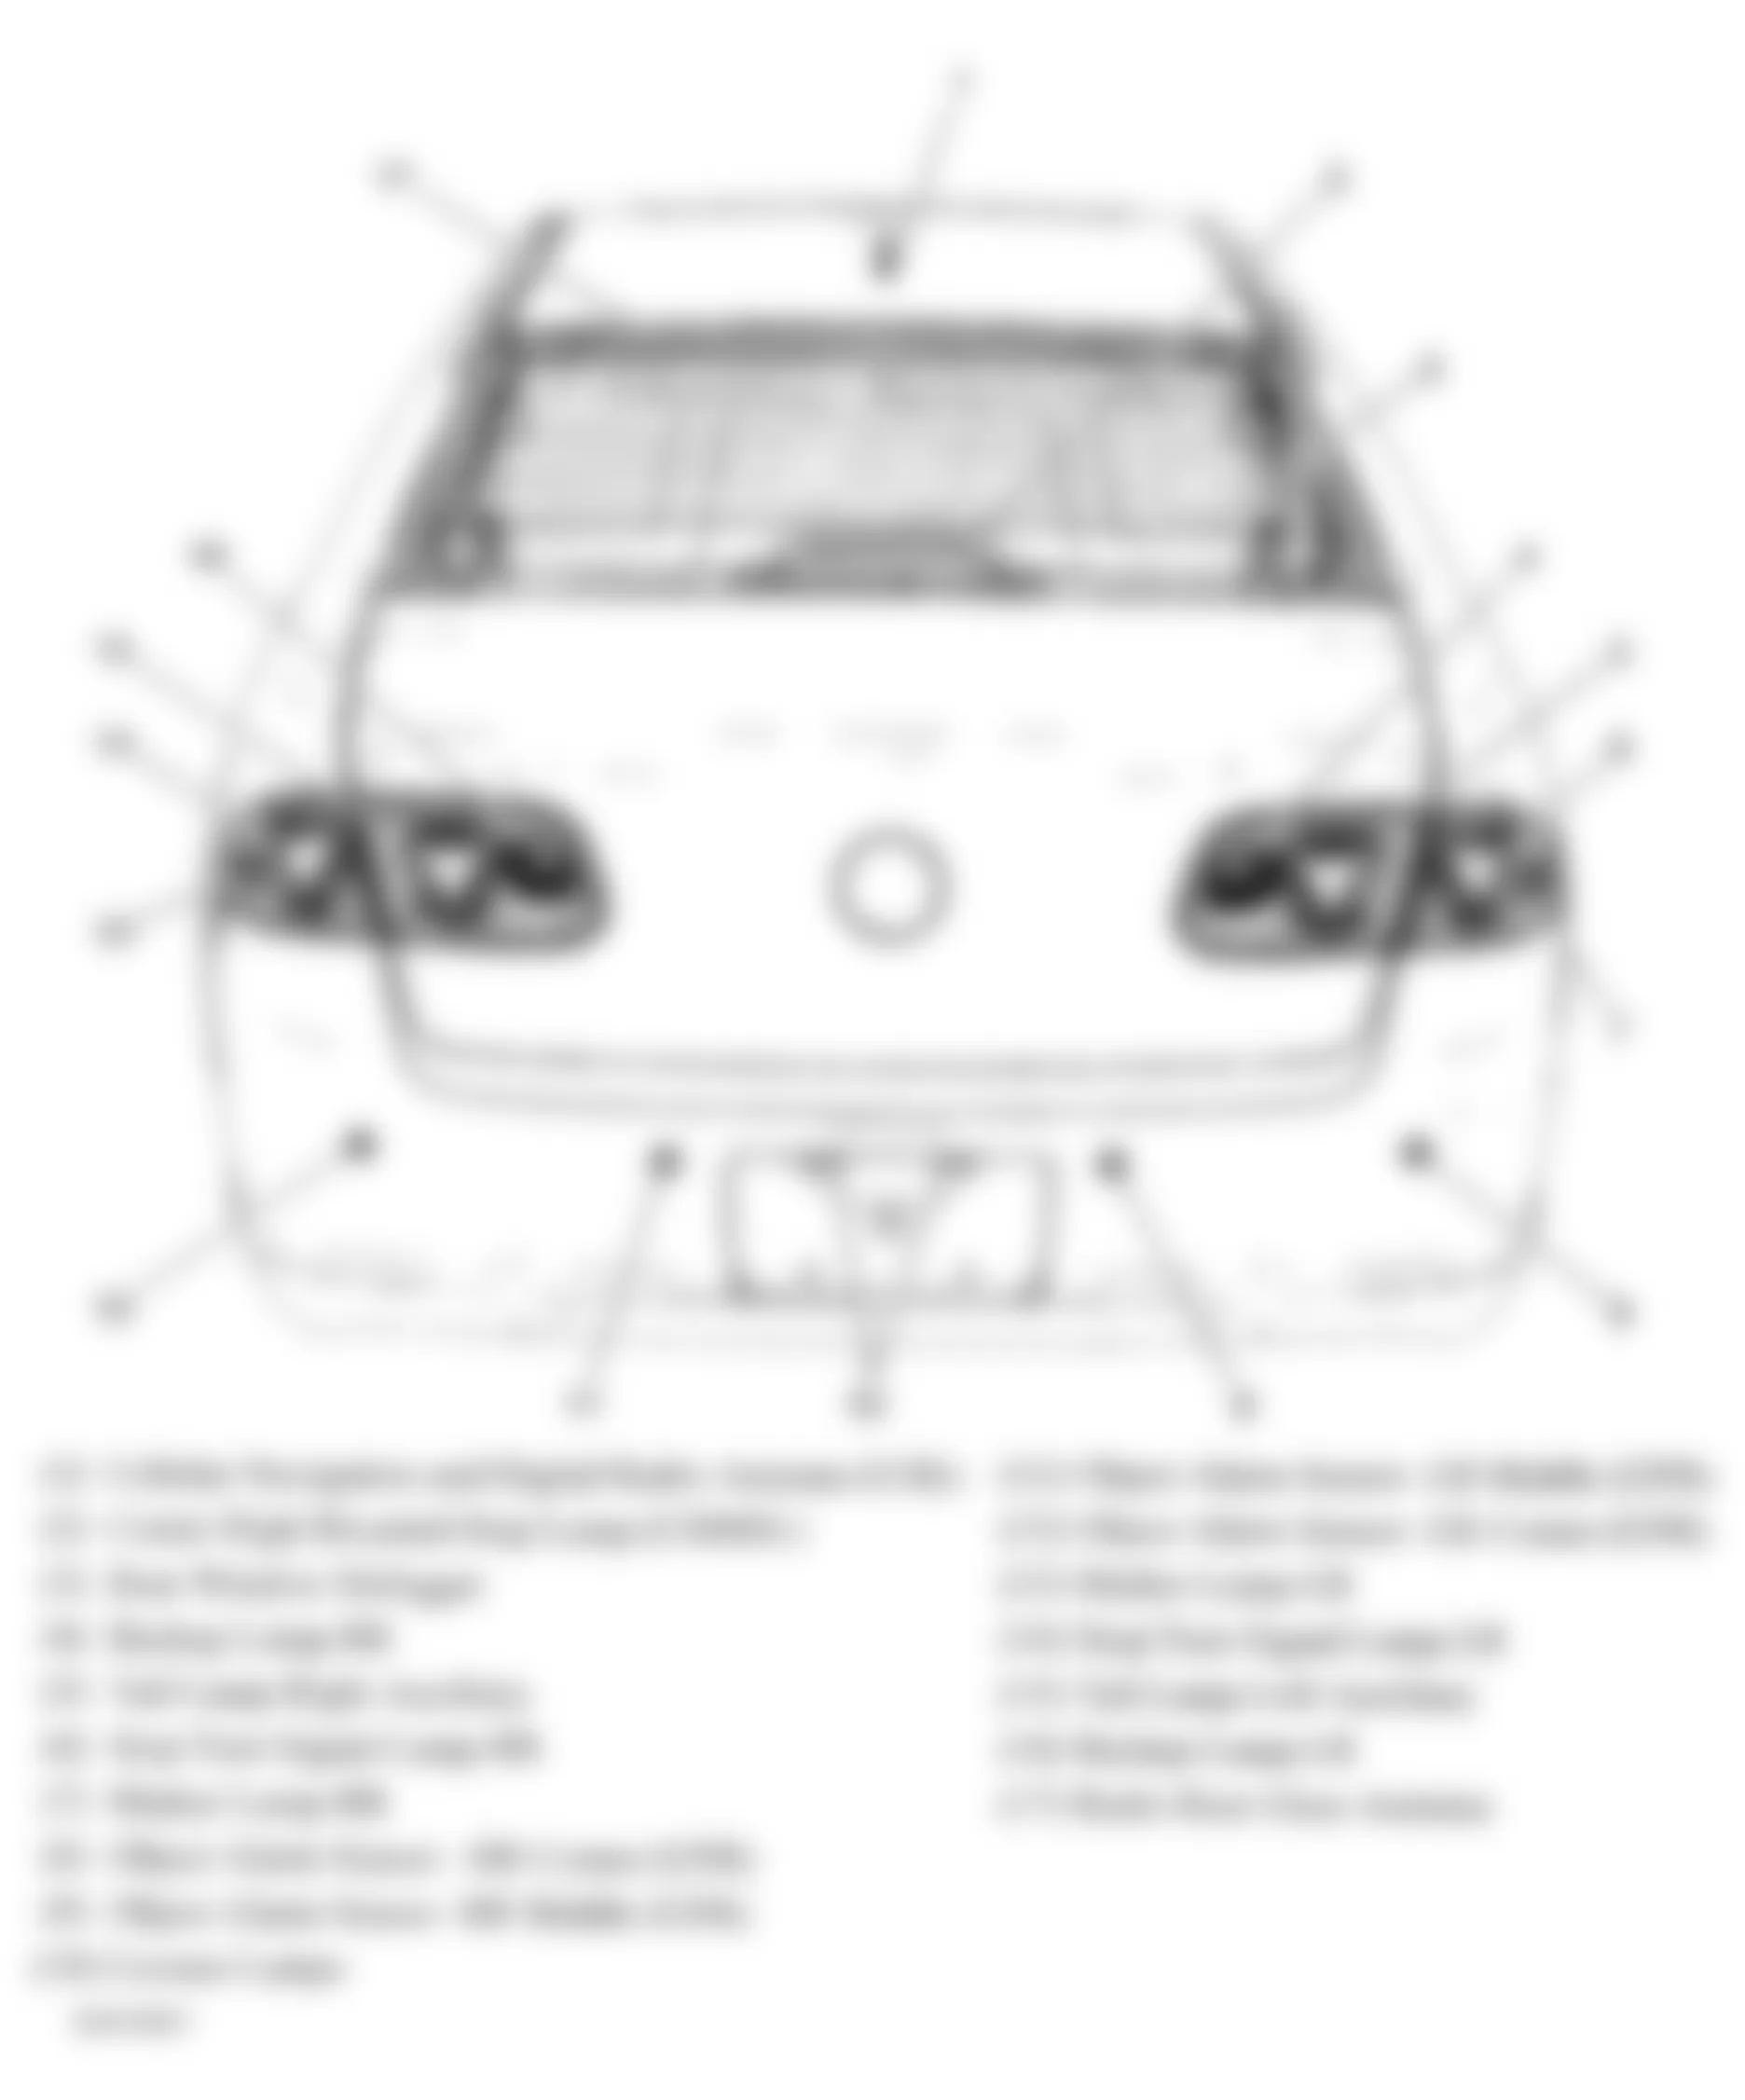 Buick Lucerne CXS 2007 - Component Locations -  Rear Of Vehicle